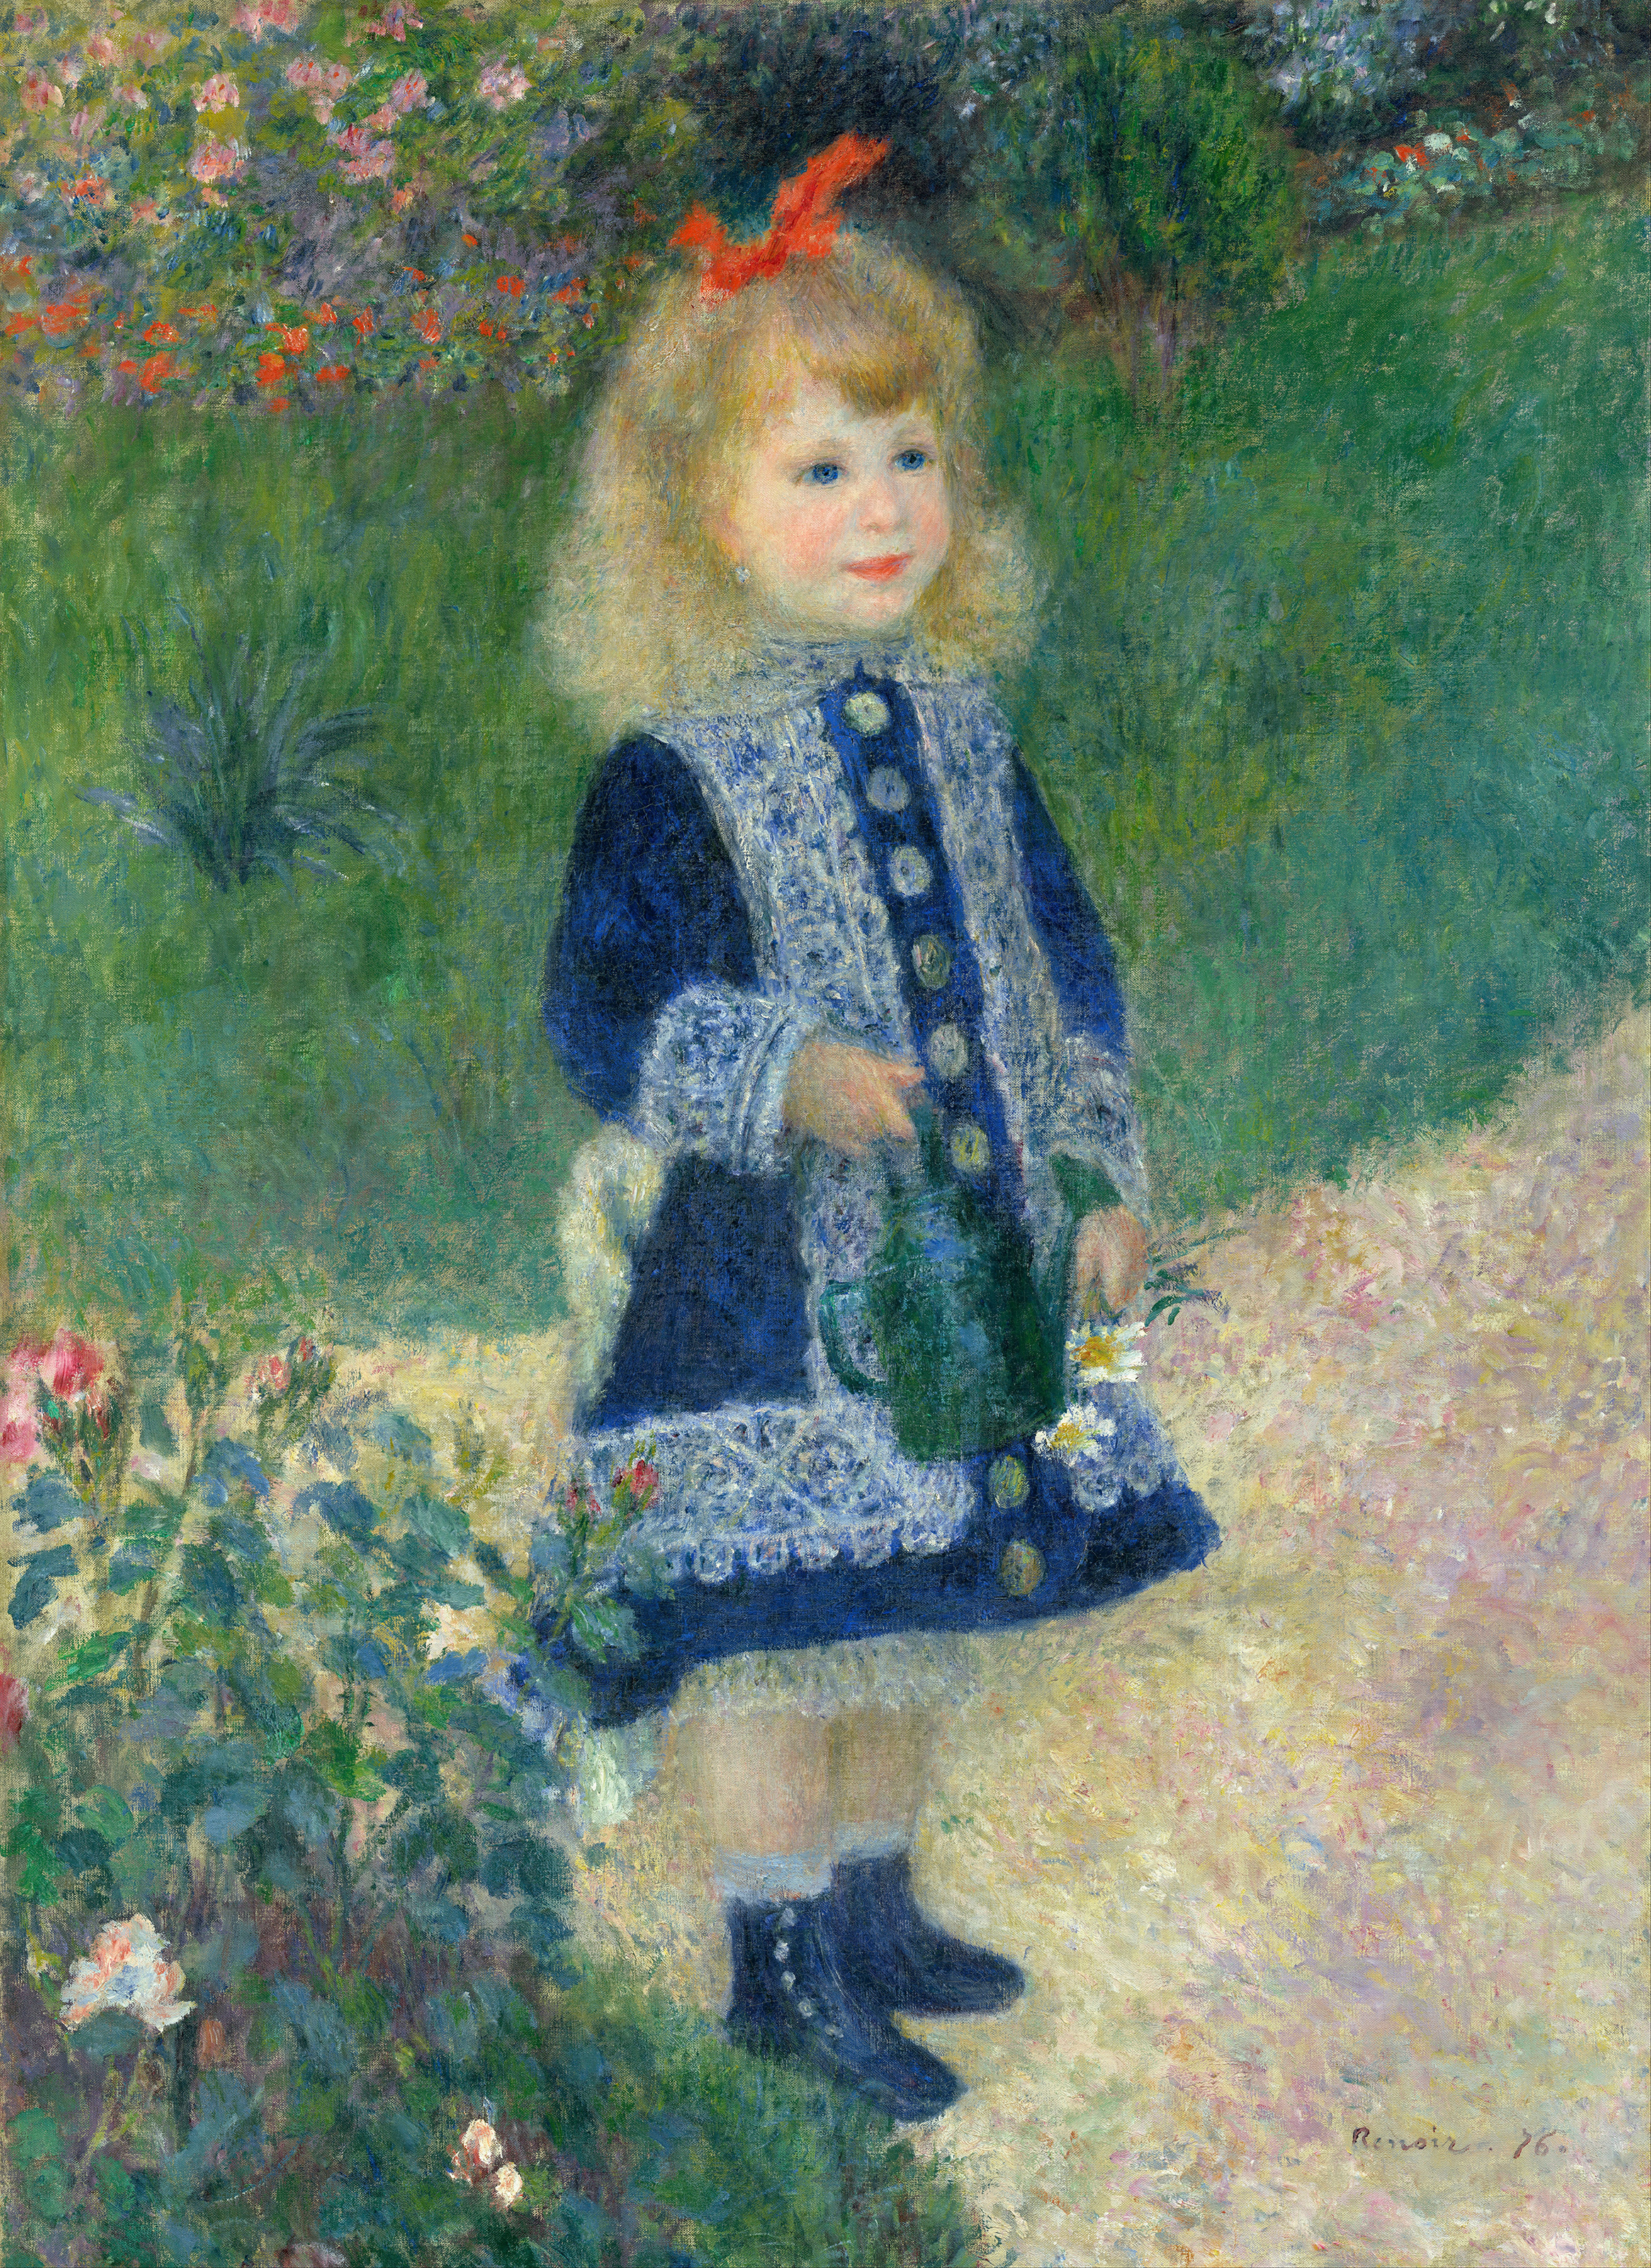 A Girl with a Watering Can by Pierre-Auguste Renoir - 1876 - 73 x 100 cm National Gallery of Art